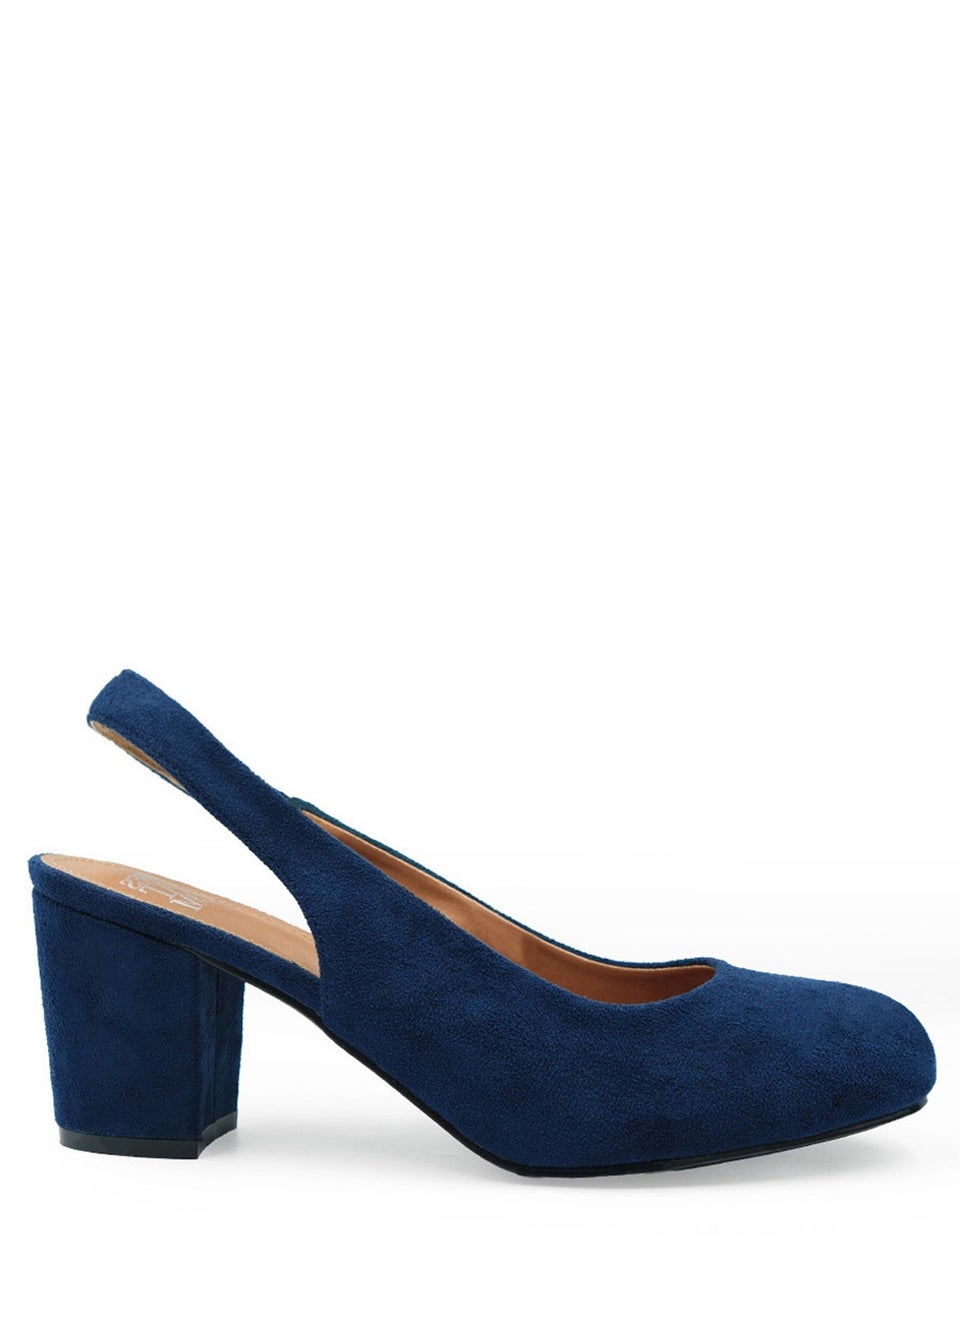 Where's That From Navy Suede Edith Block Heel Slingback Shoes